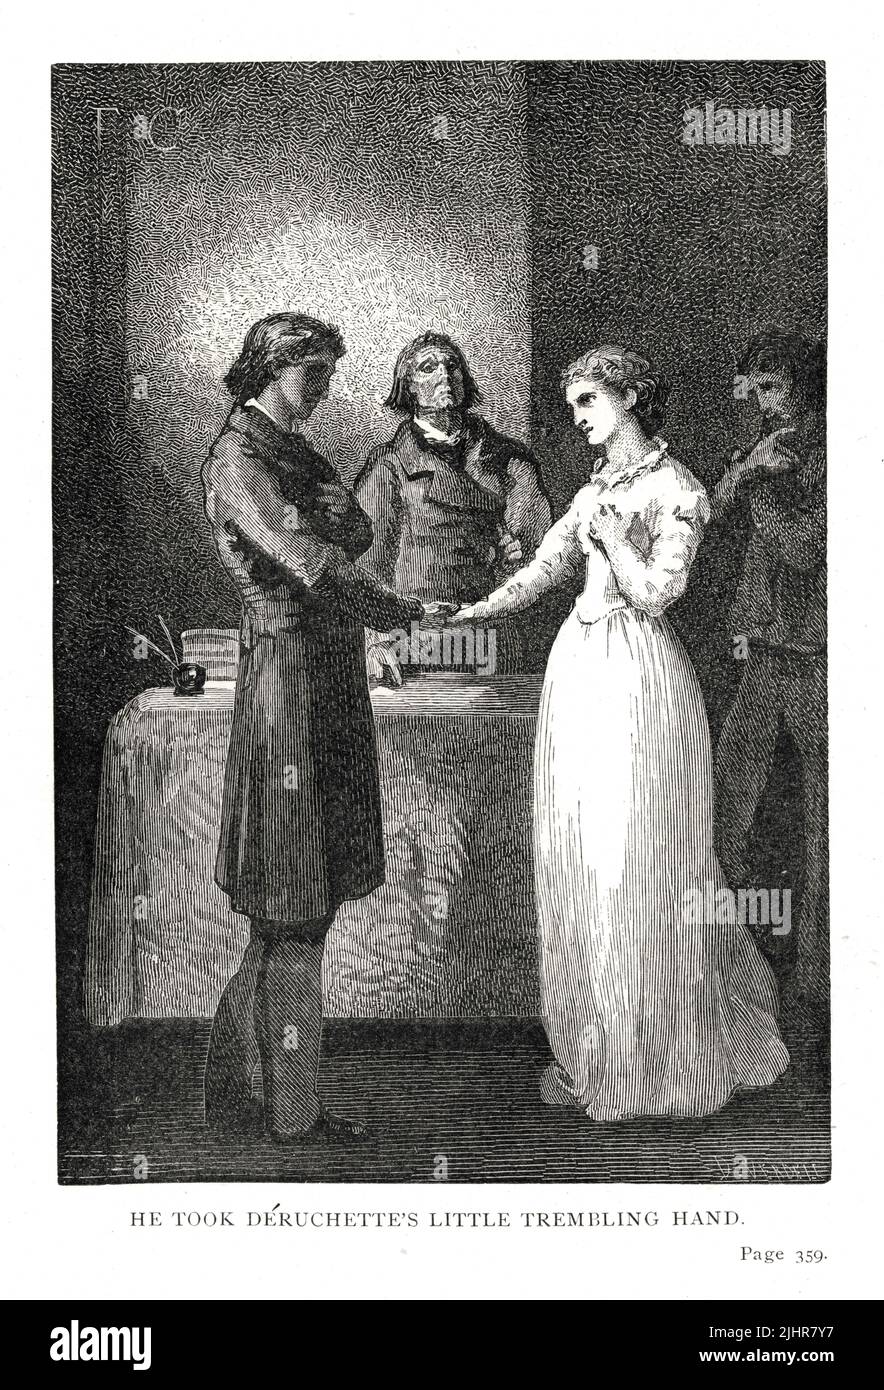 The wedding: 'The Dean placed the ring upon the book; then handed it to Caudray, who took Déruchette's little trembling left hand, passed the ring over her fourth finger, and said: 'With this ring I thee wed!'' Third part, Book III, chapter III.  Illustration from a set of 56 engravings published in the English edition of 'Les Travailleurs de la Mer' ('Toilers of the Sea'), by Victor Hugo, published in 1869 by Sampson Low, Son and Marston.  Illustrator: François-Nicolas Chifflart. Engraver: D. Verdeil. Stock Photo